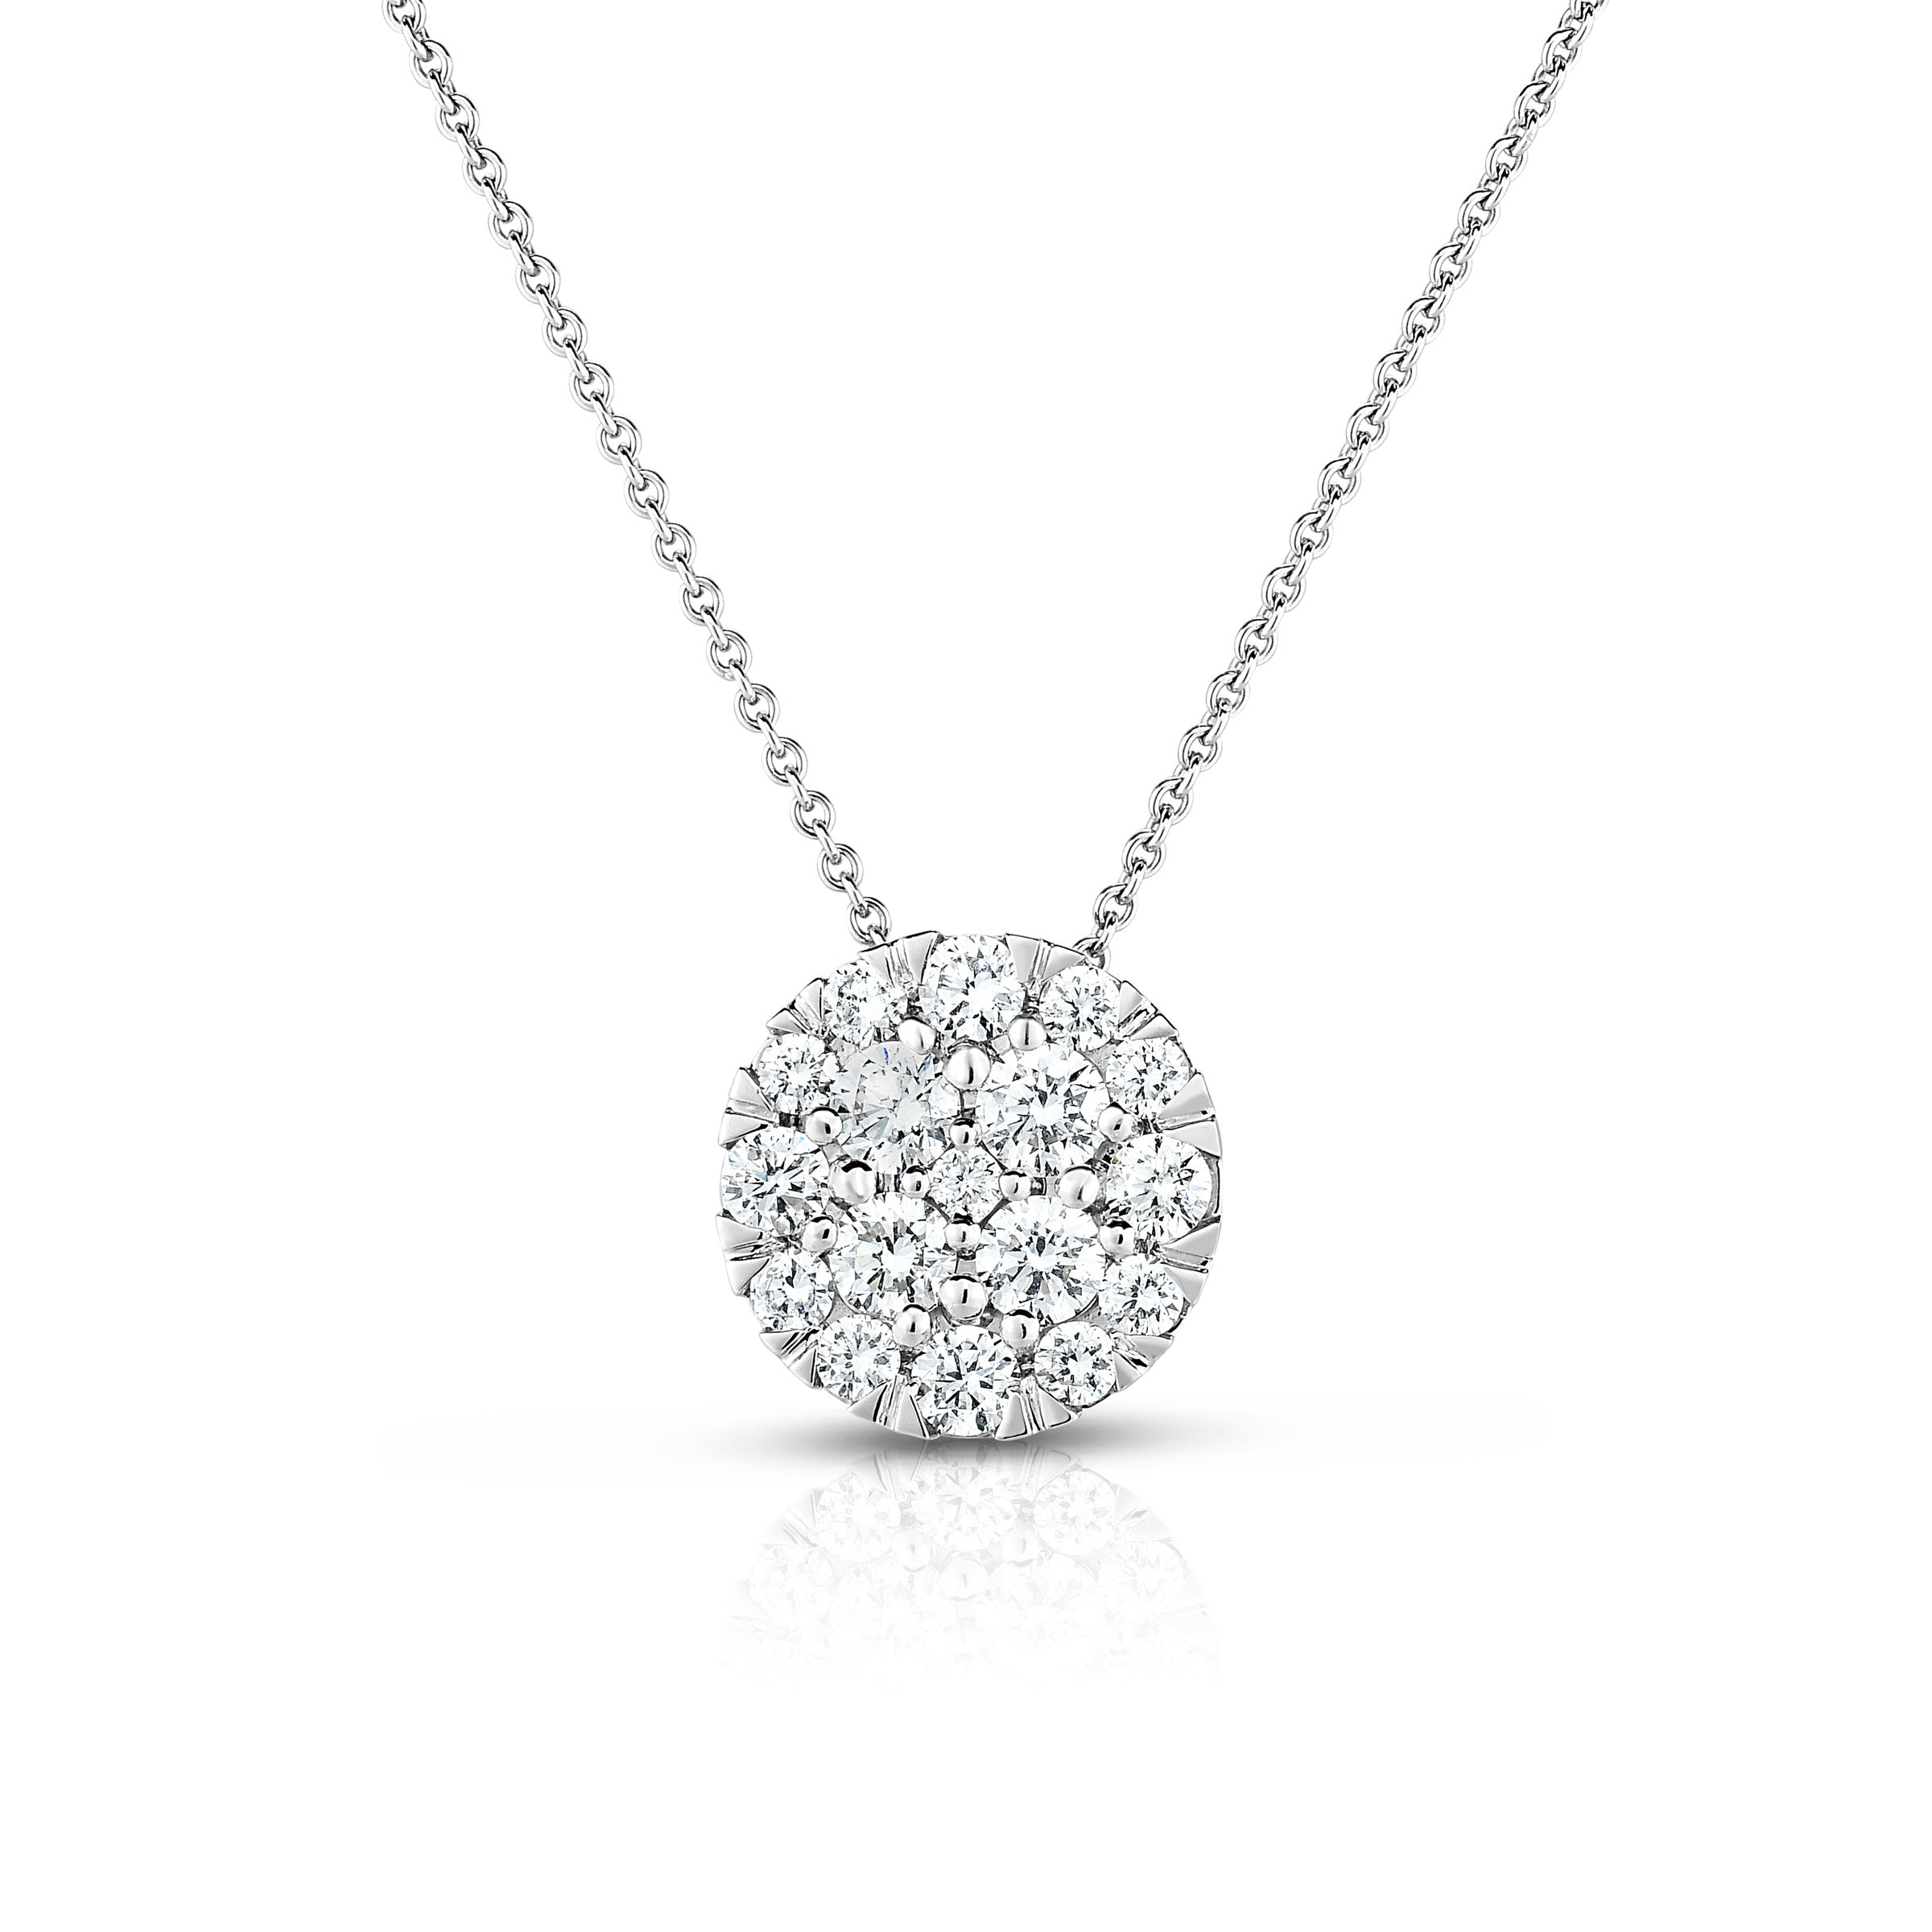 Necklaces and Pendants - Swirl Solitaire Round Diamond Pendant 0.85 Carat  in 14 Karat White Gold - PD2459